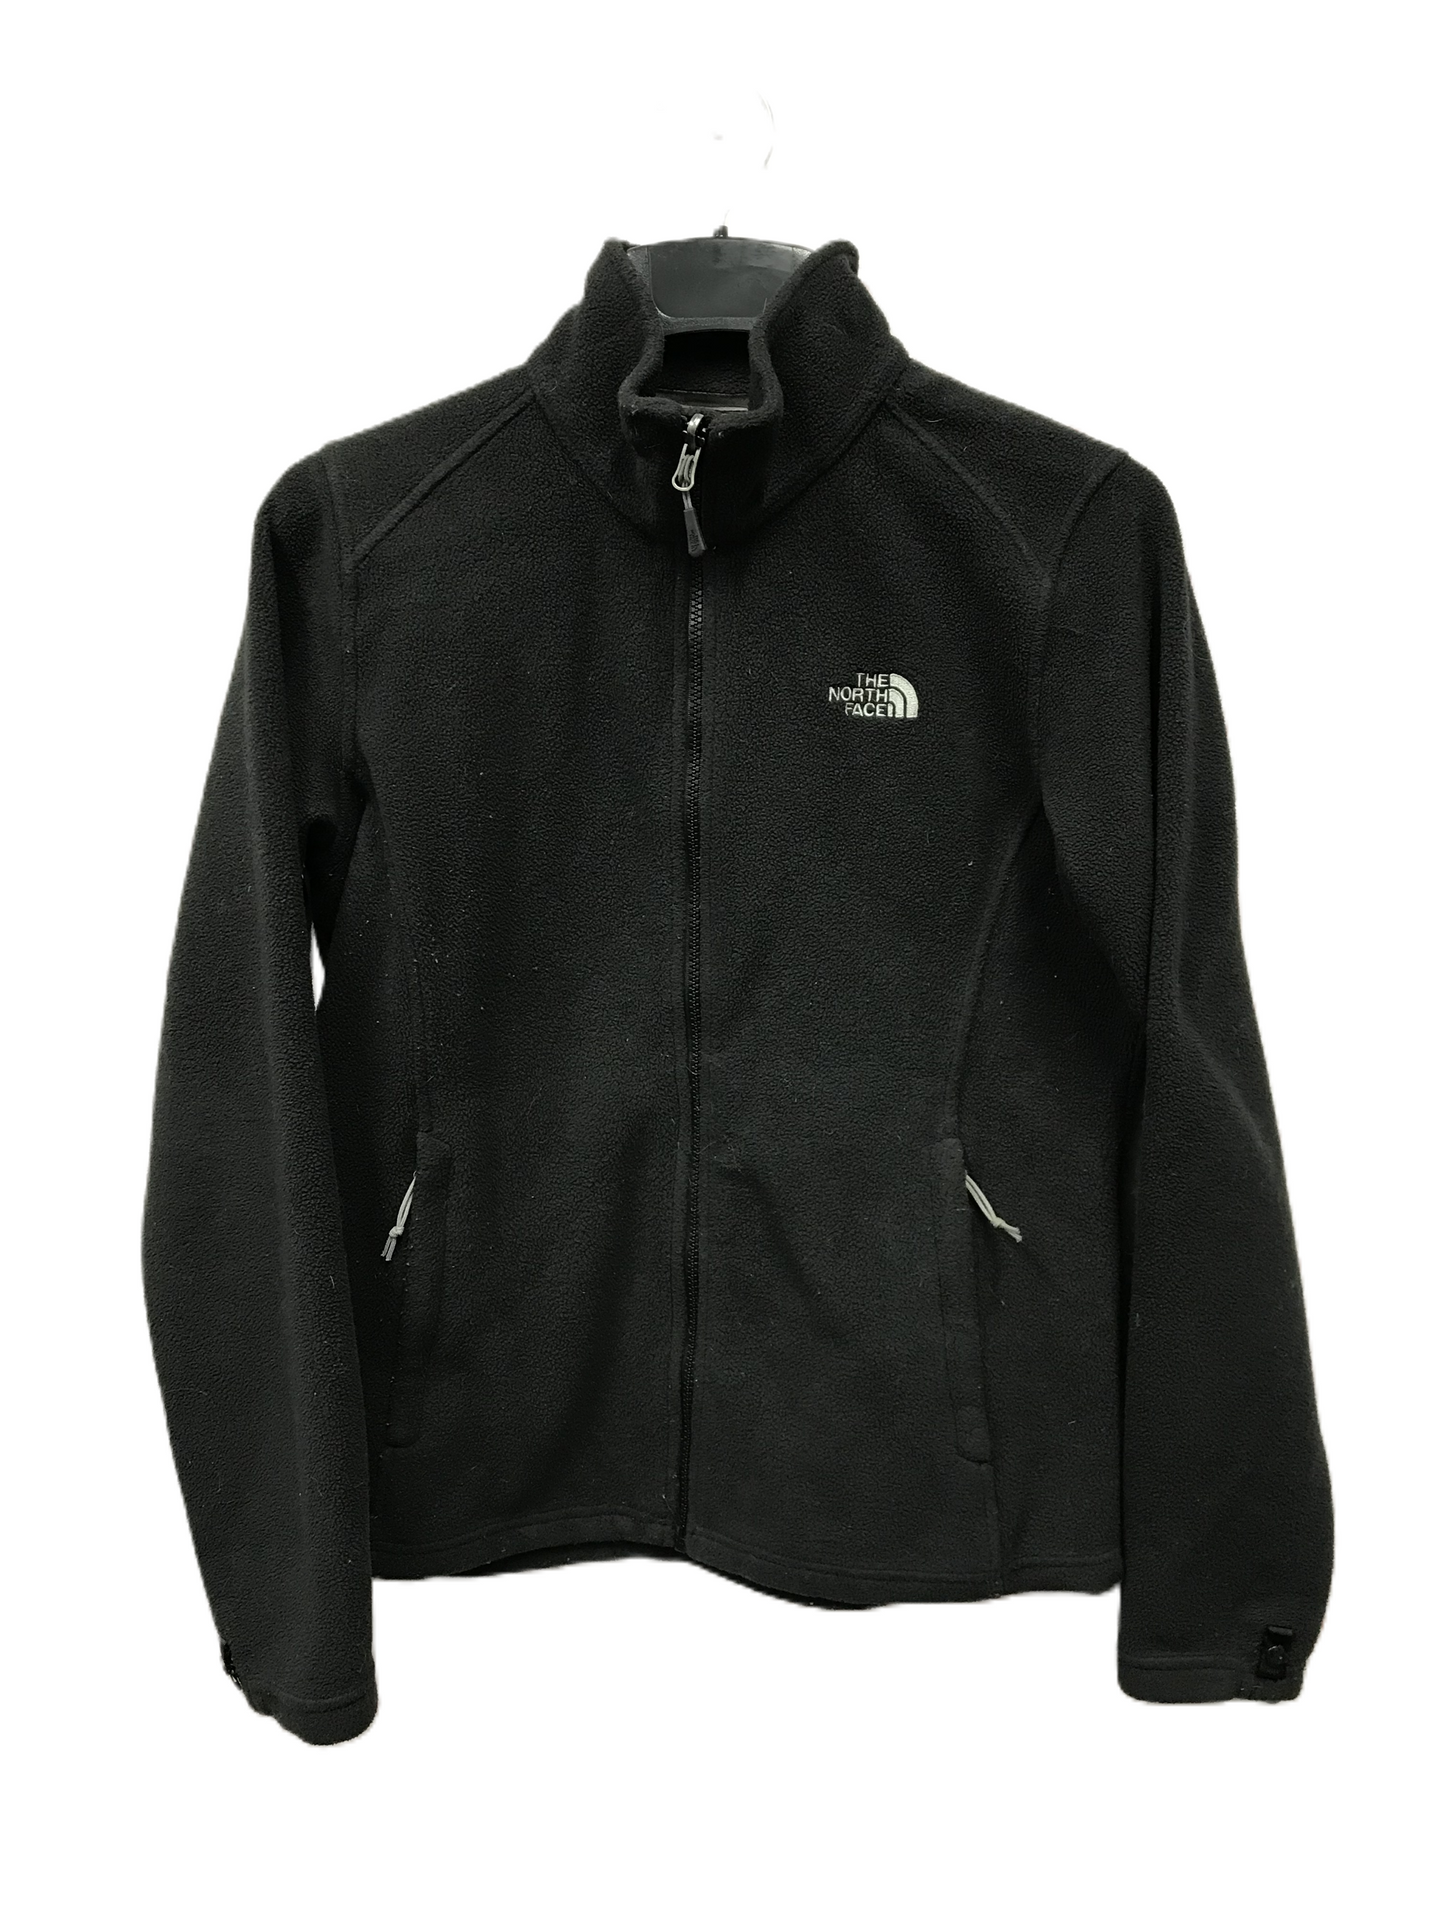 Athletic Fleece By The North Face  Size: M